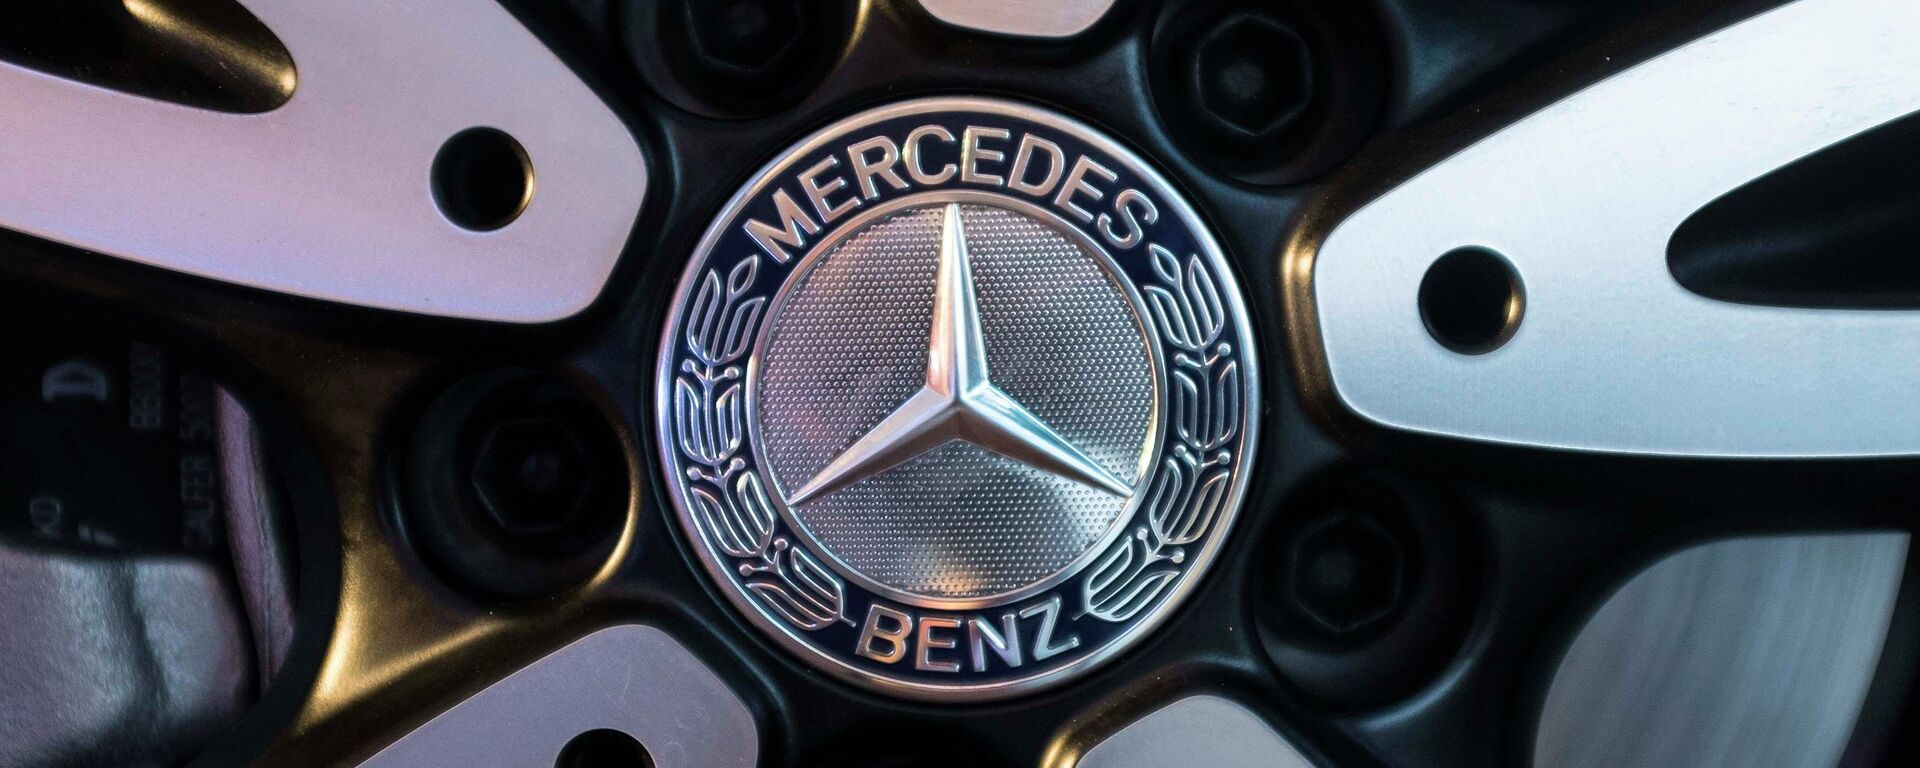 The logo of Mercedes-Benz is seen on the wheel of the new version of A-Class car during its launch in Mumbai - Sputnik Mundo, 1920, 22.07.2021